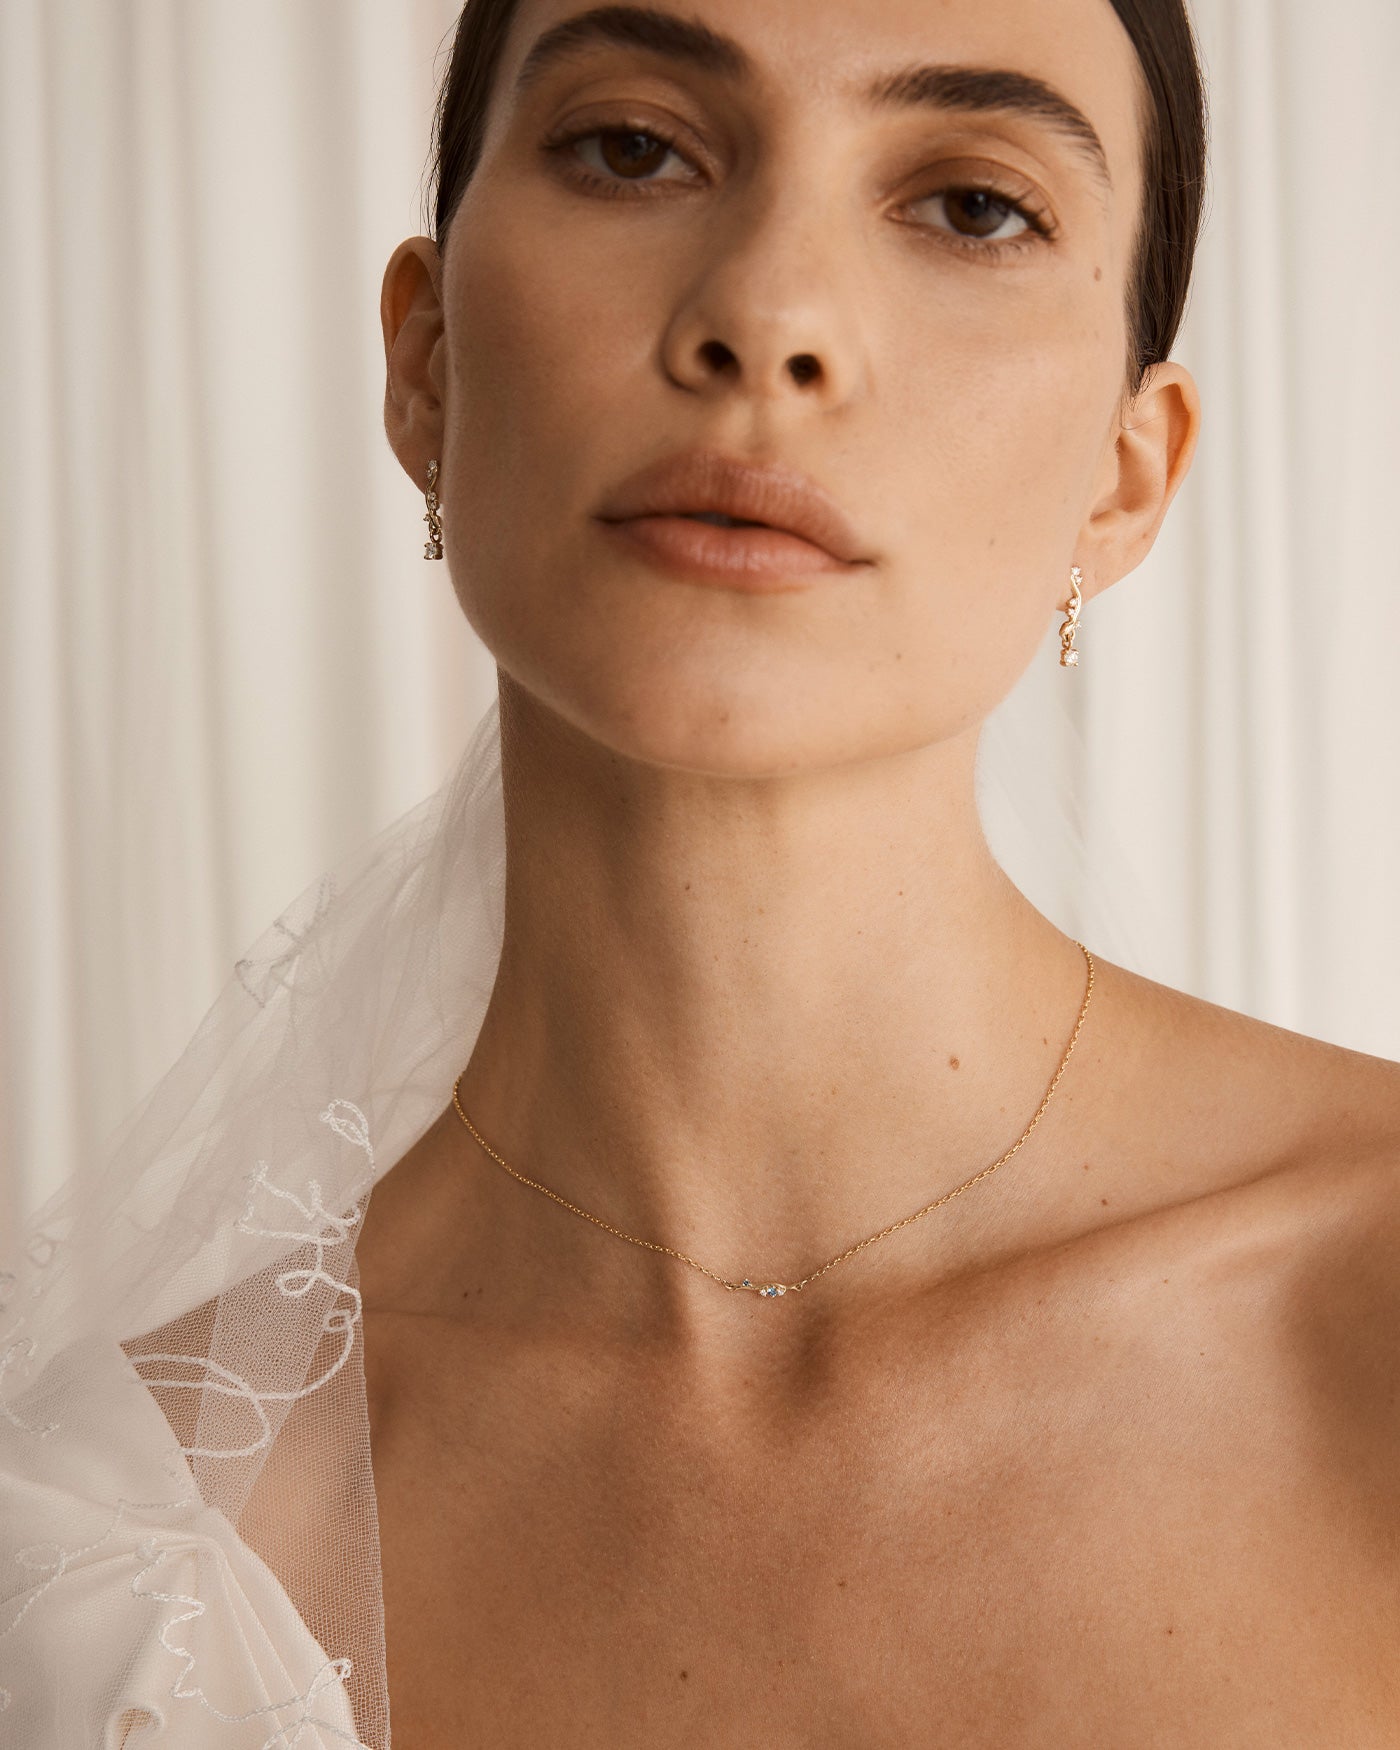 Image of woman wearing a bridal gown and wearing the ember charm necklace with blue sapphires and white diamonds